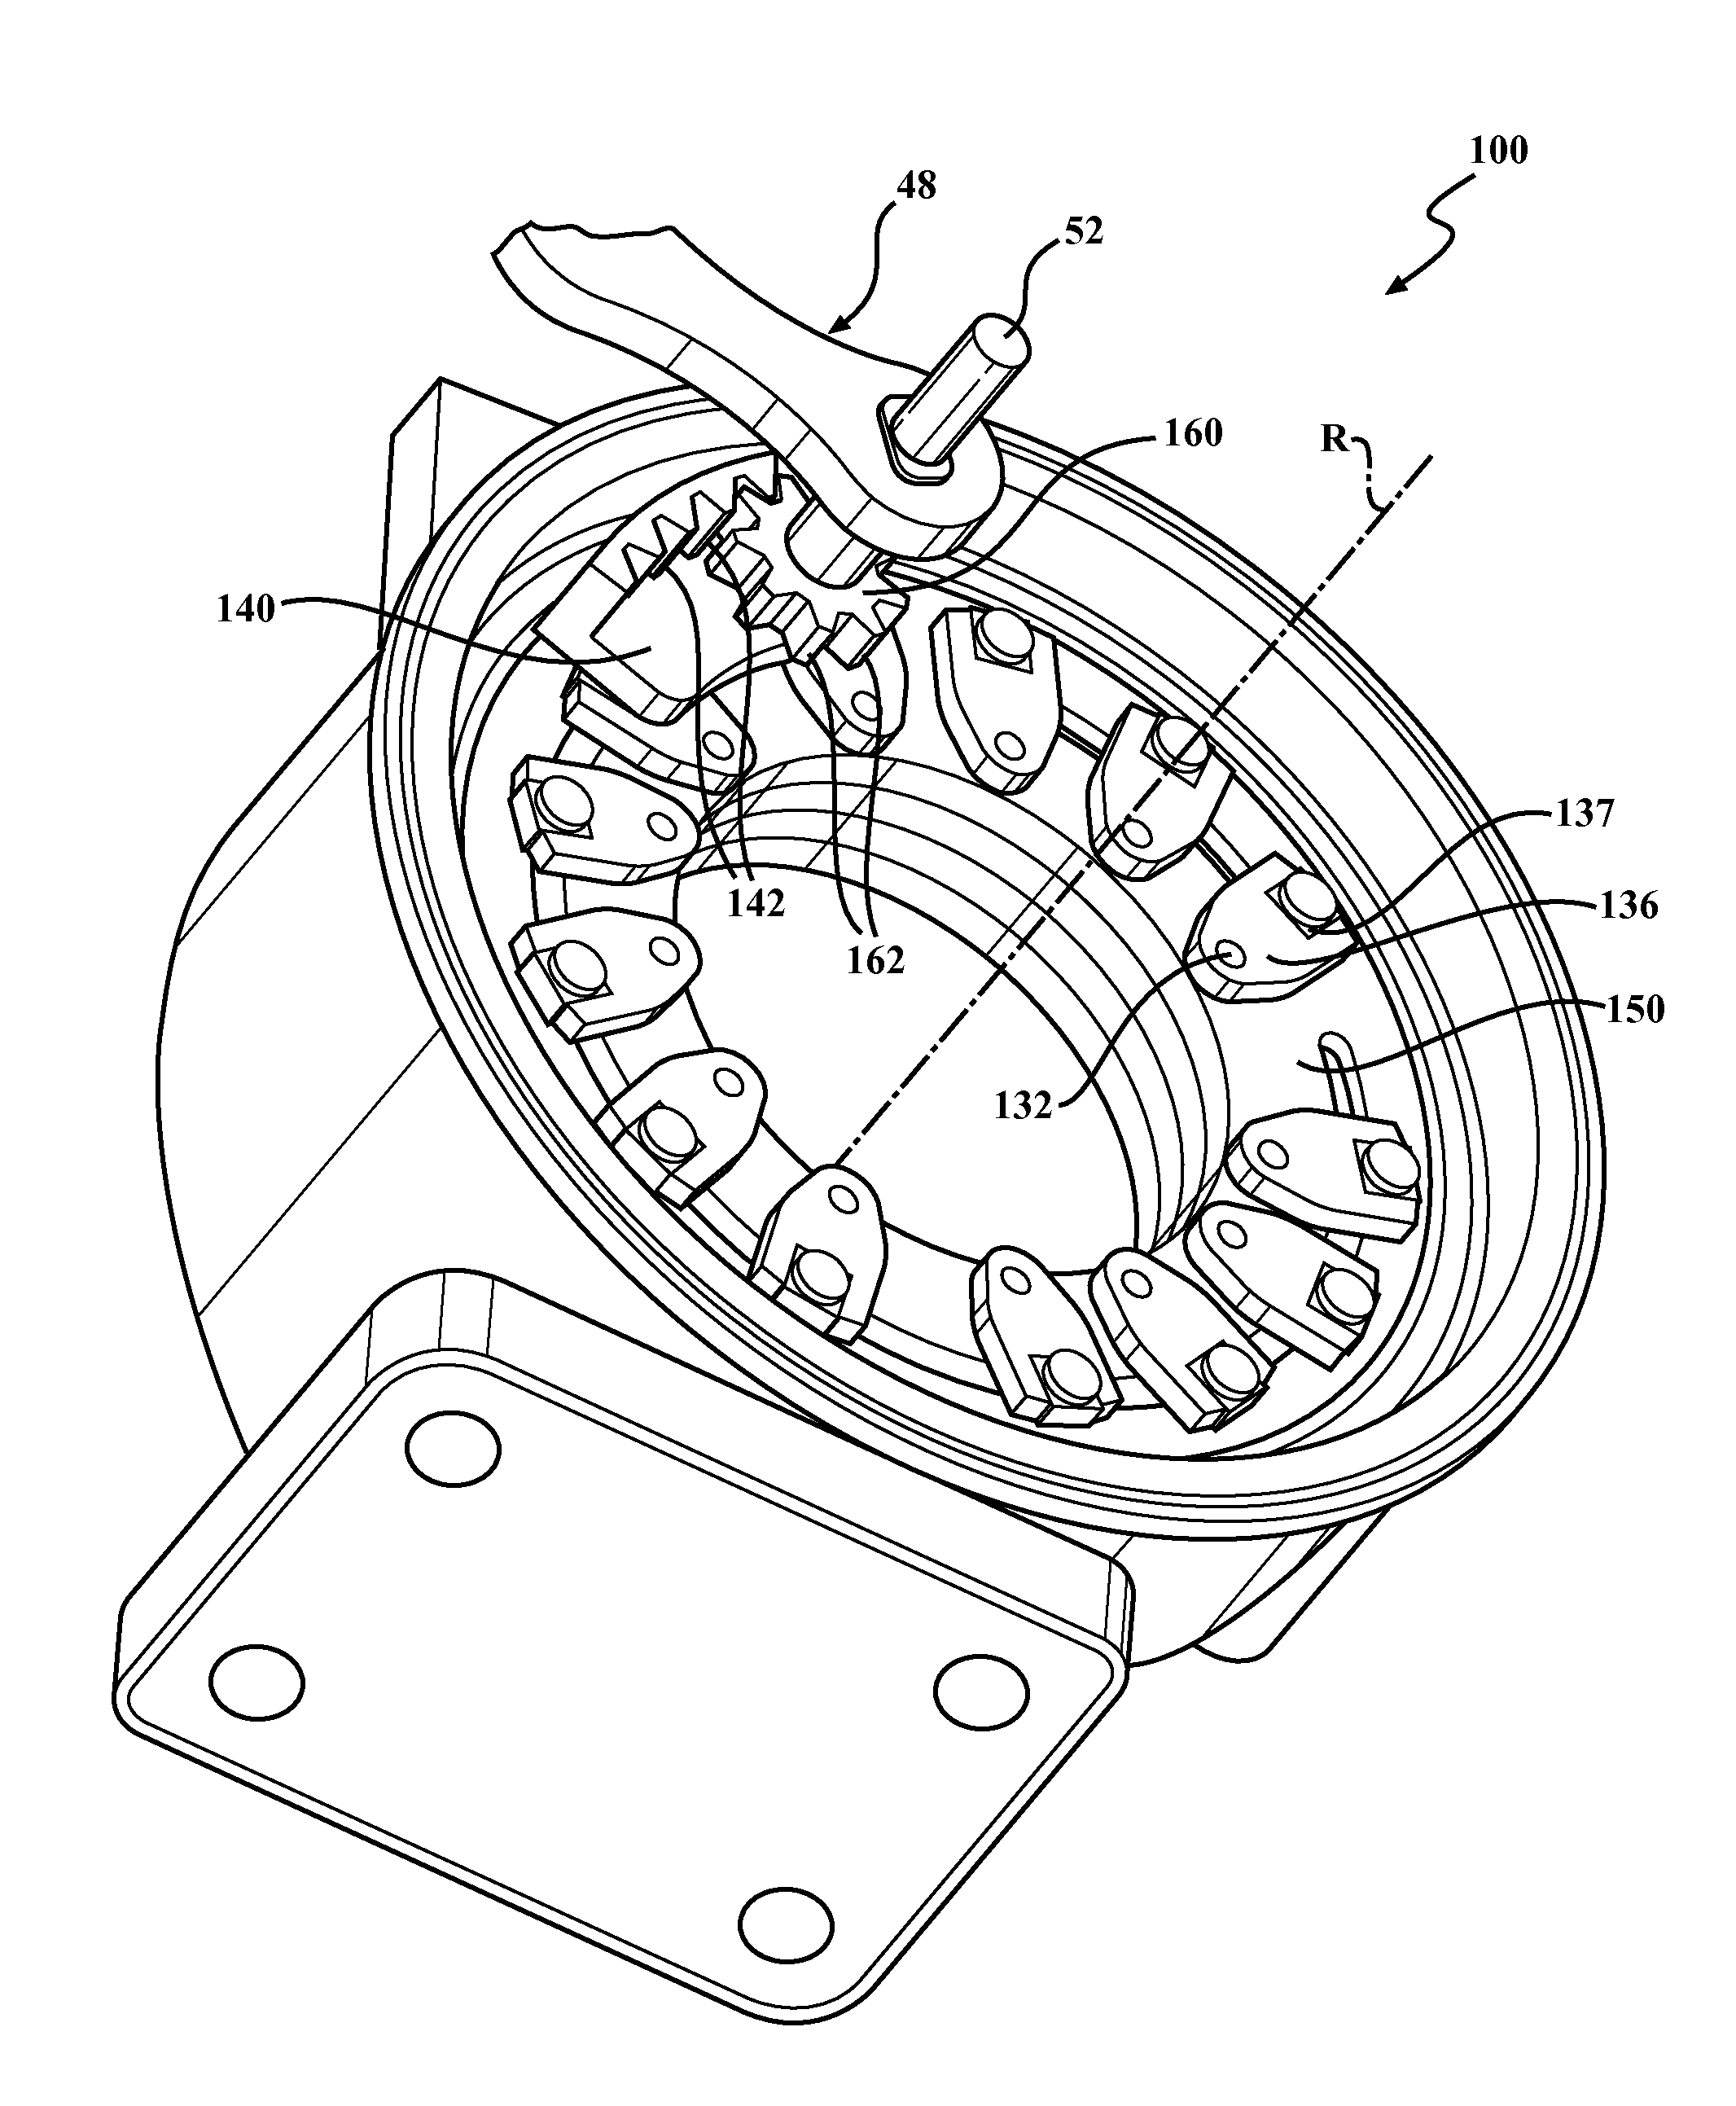 Actuating mechanism and gear driven adjustment ring for a variable geometry turbocharger